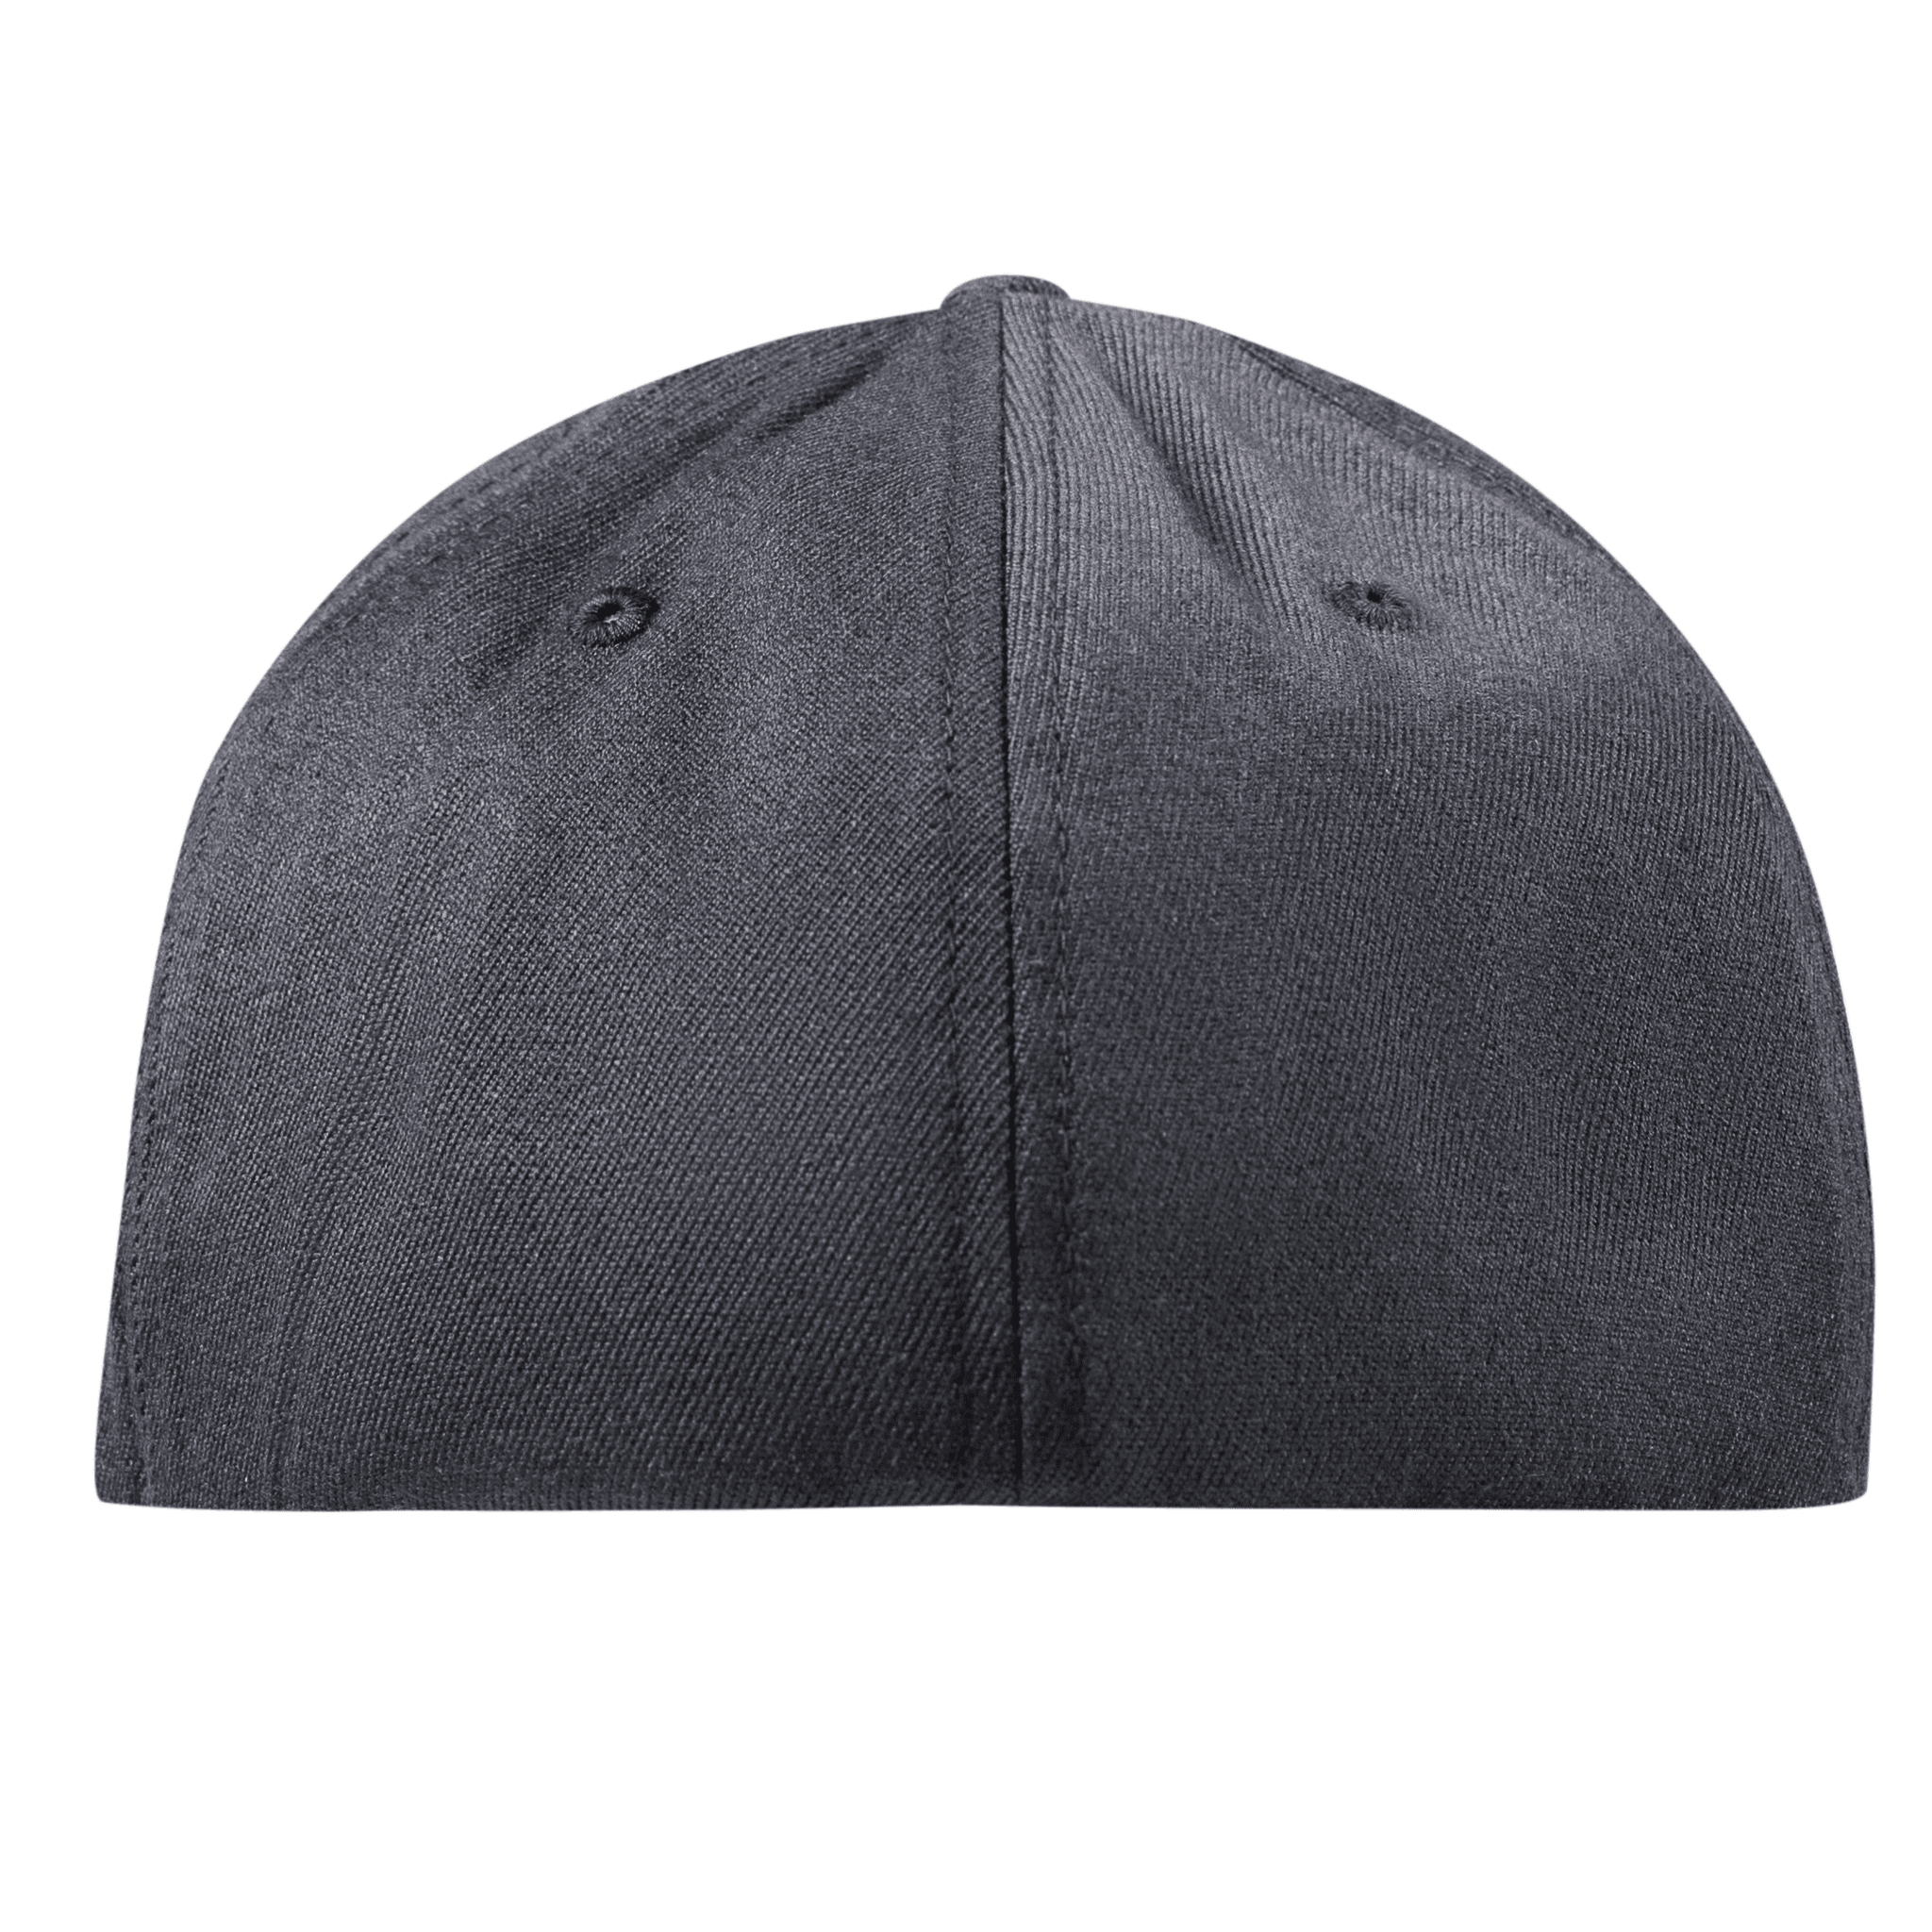 Wyoming 44 Flexfit Fitted Back Charcoal